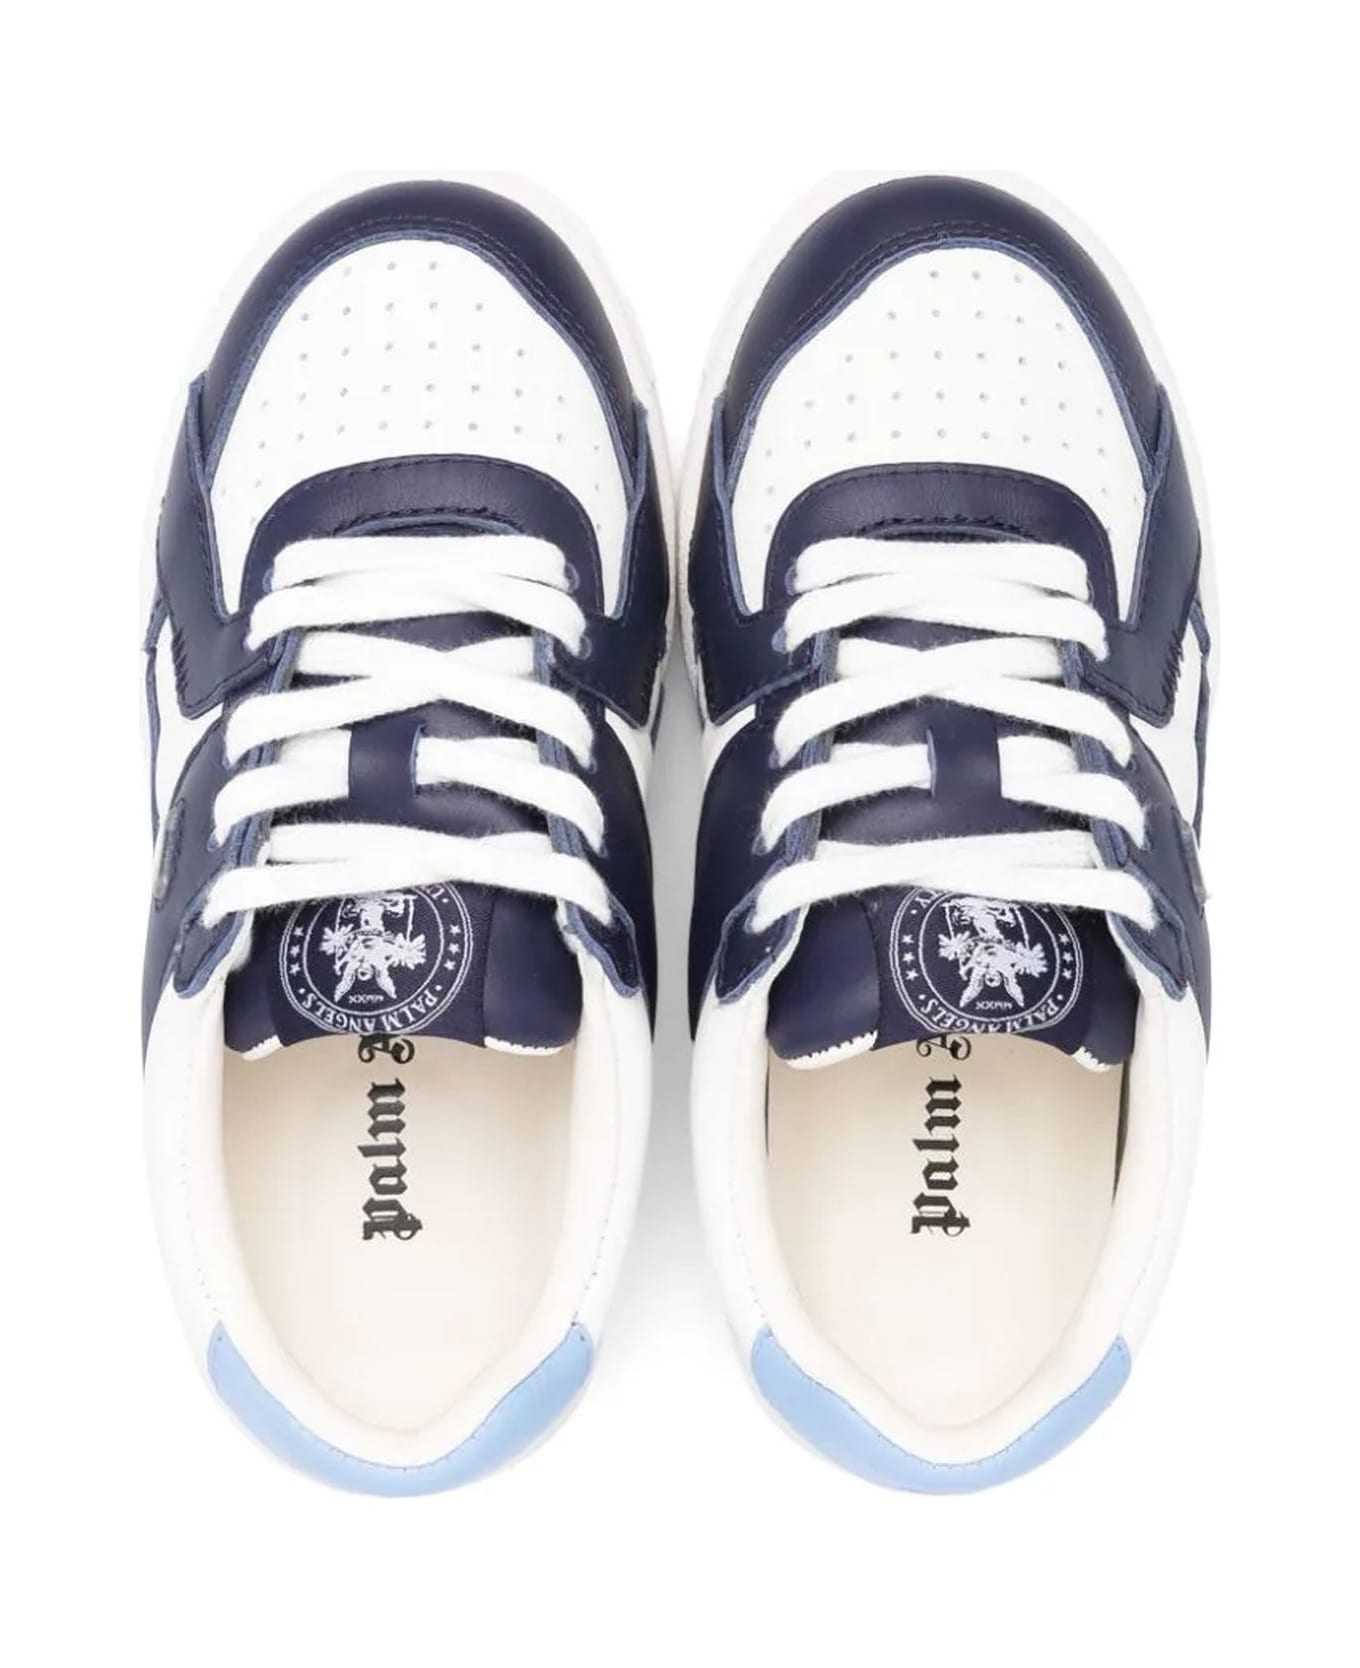 Palm Angels Sneakers White - White